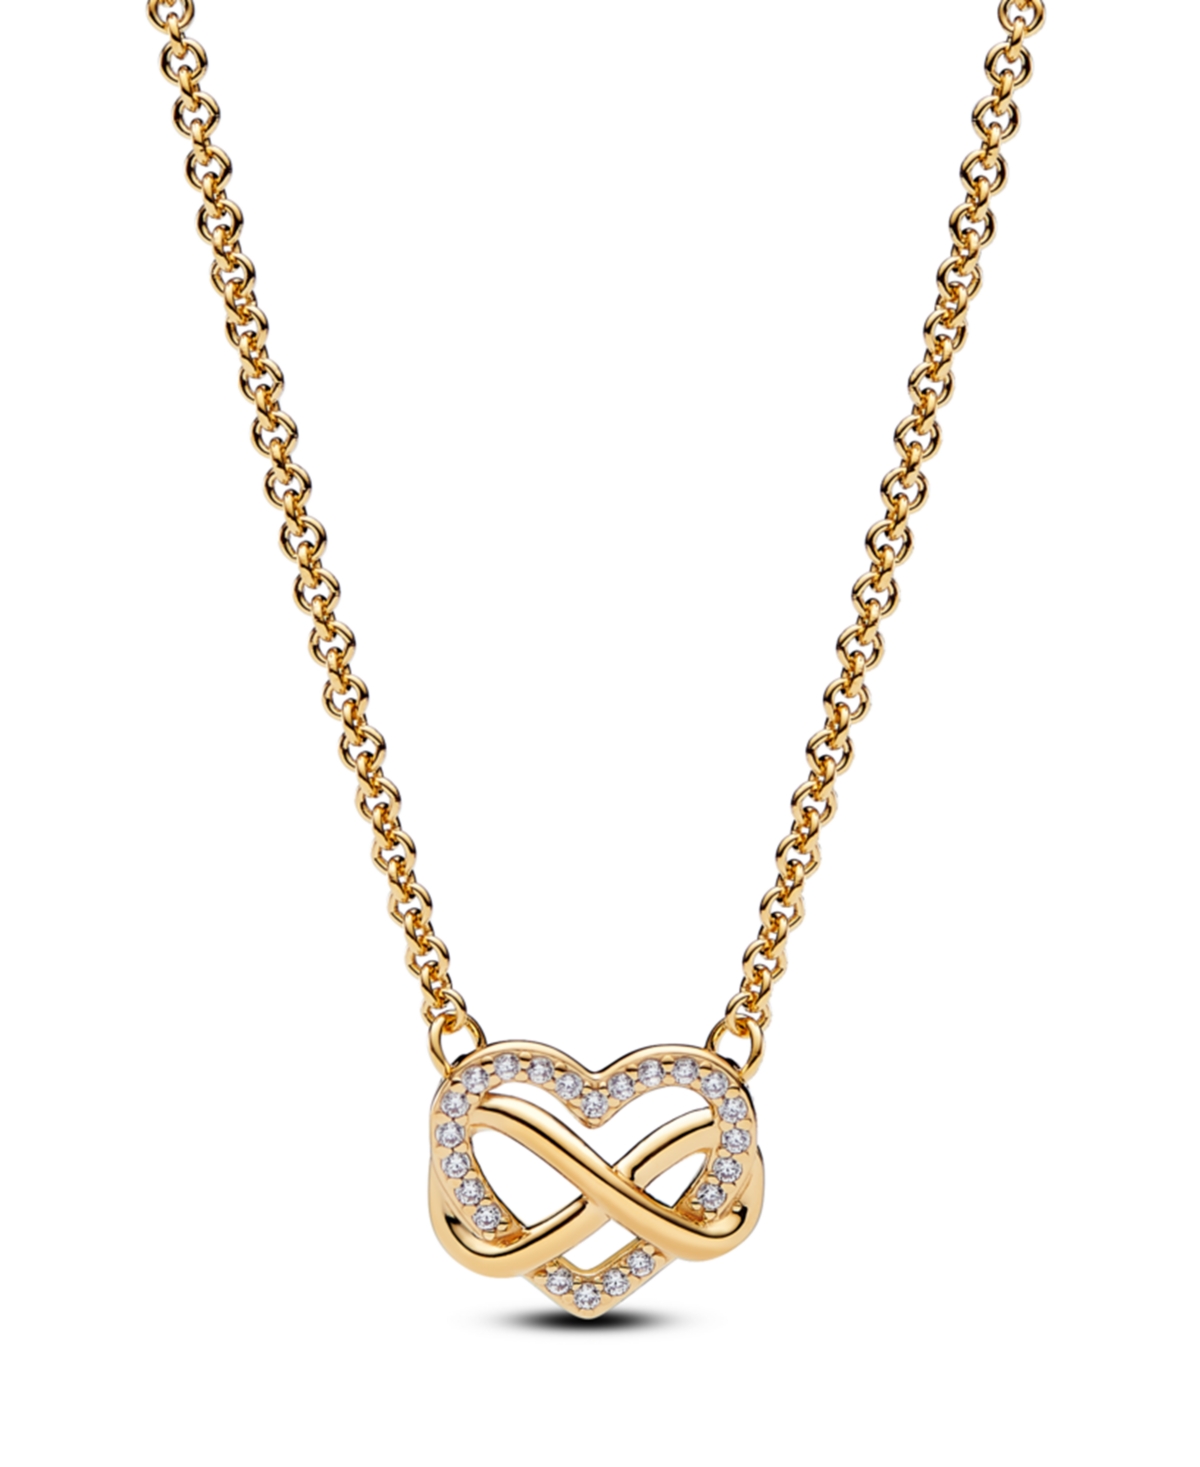 Sparkling Infinity Heart Collier Necklace - Gold